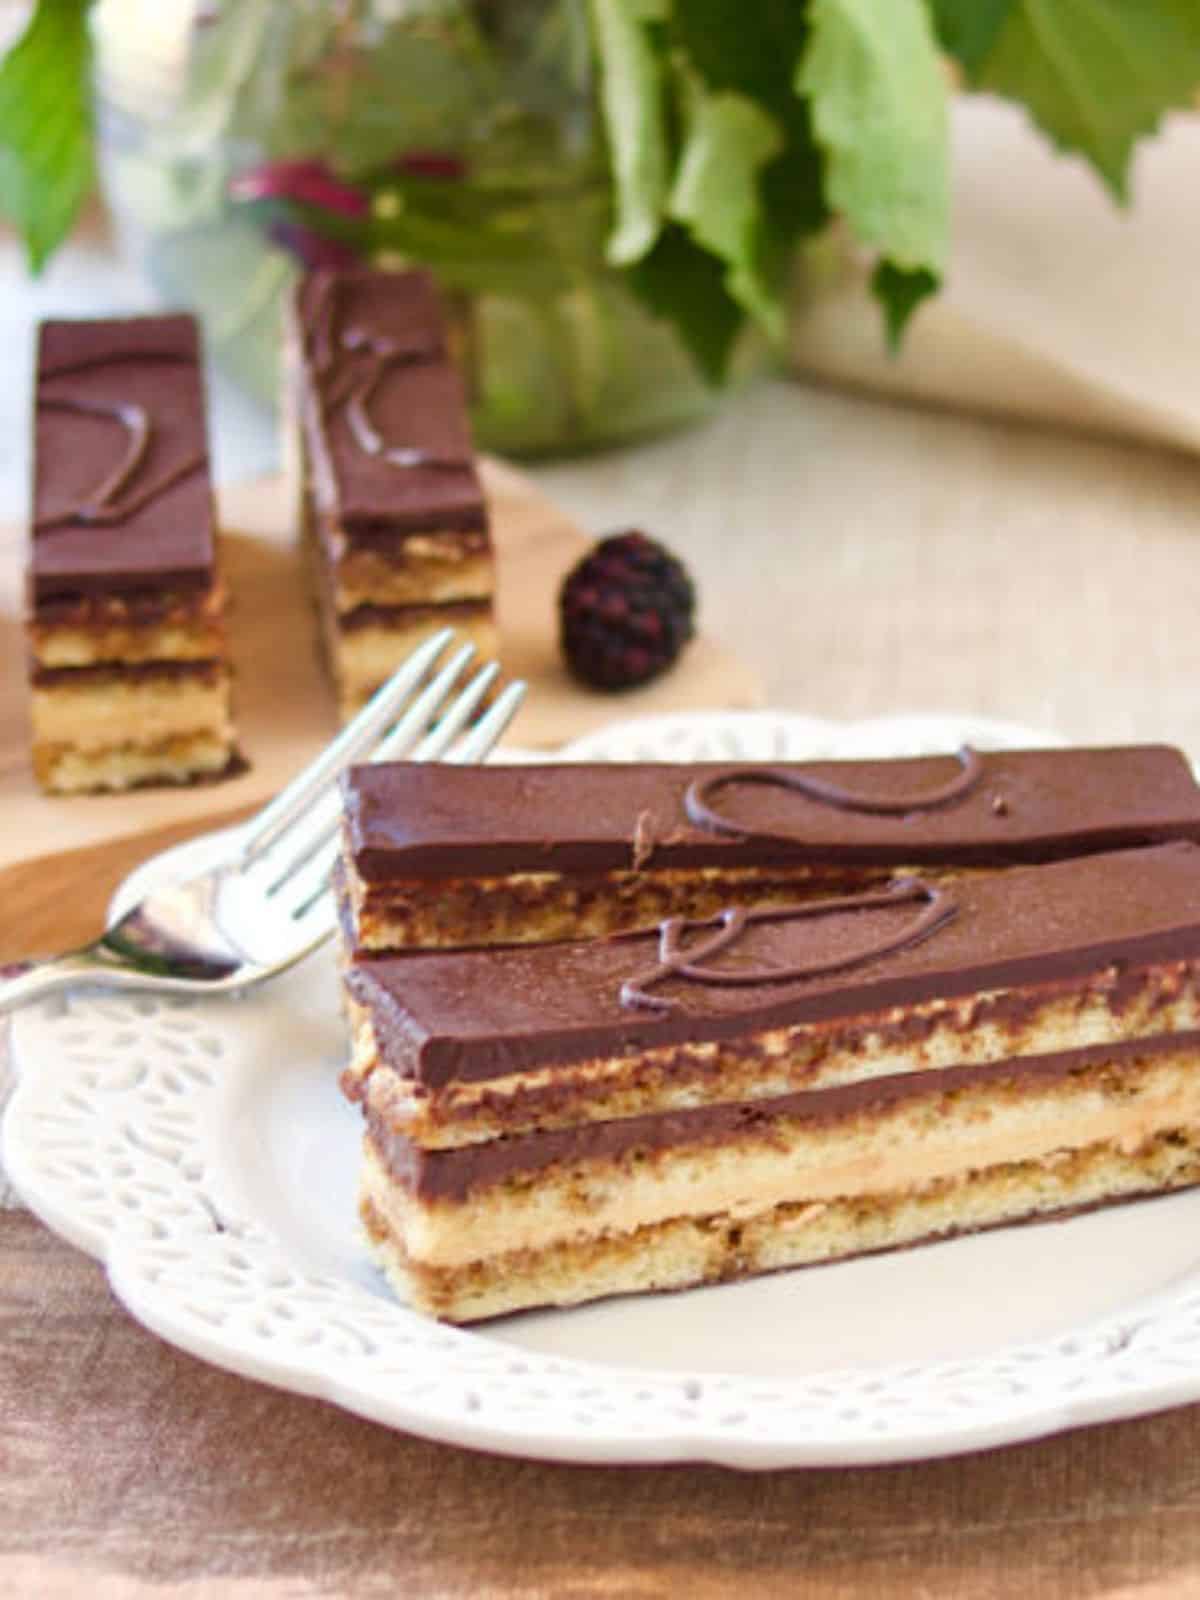 scrumptious Opera cake packed with coffee flavors, layered with Joconde sponge, coffee-flavored French buttercream, coffee syrup, melted chocolate, and opera glaze.